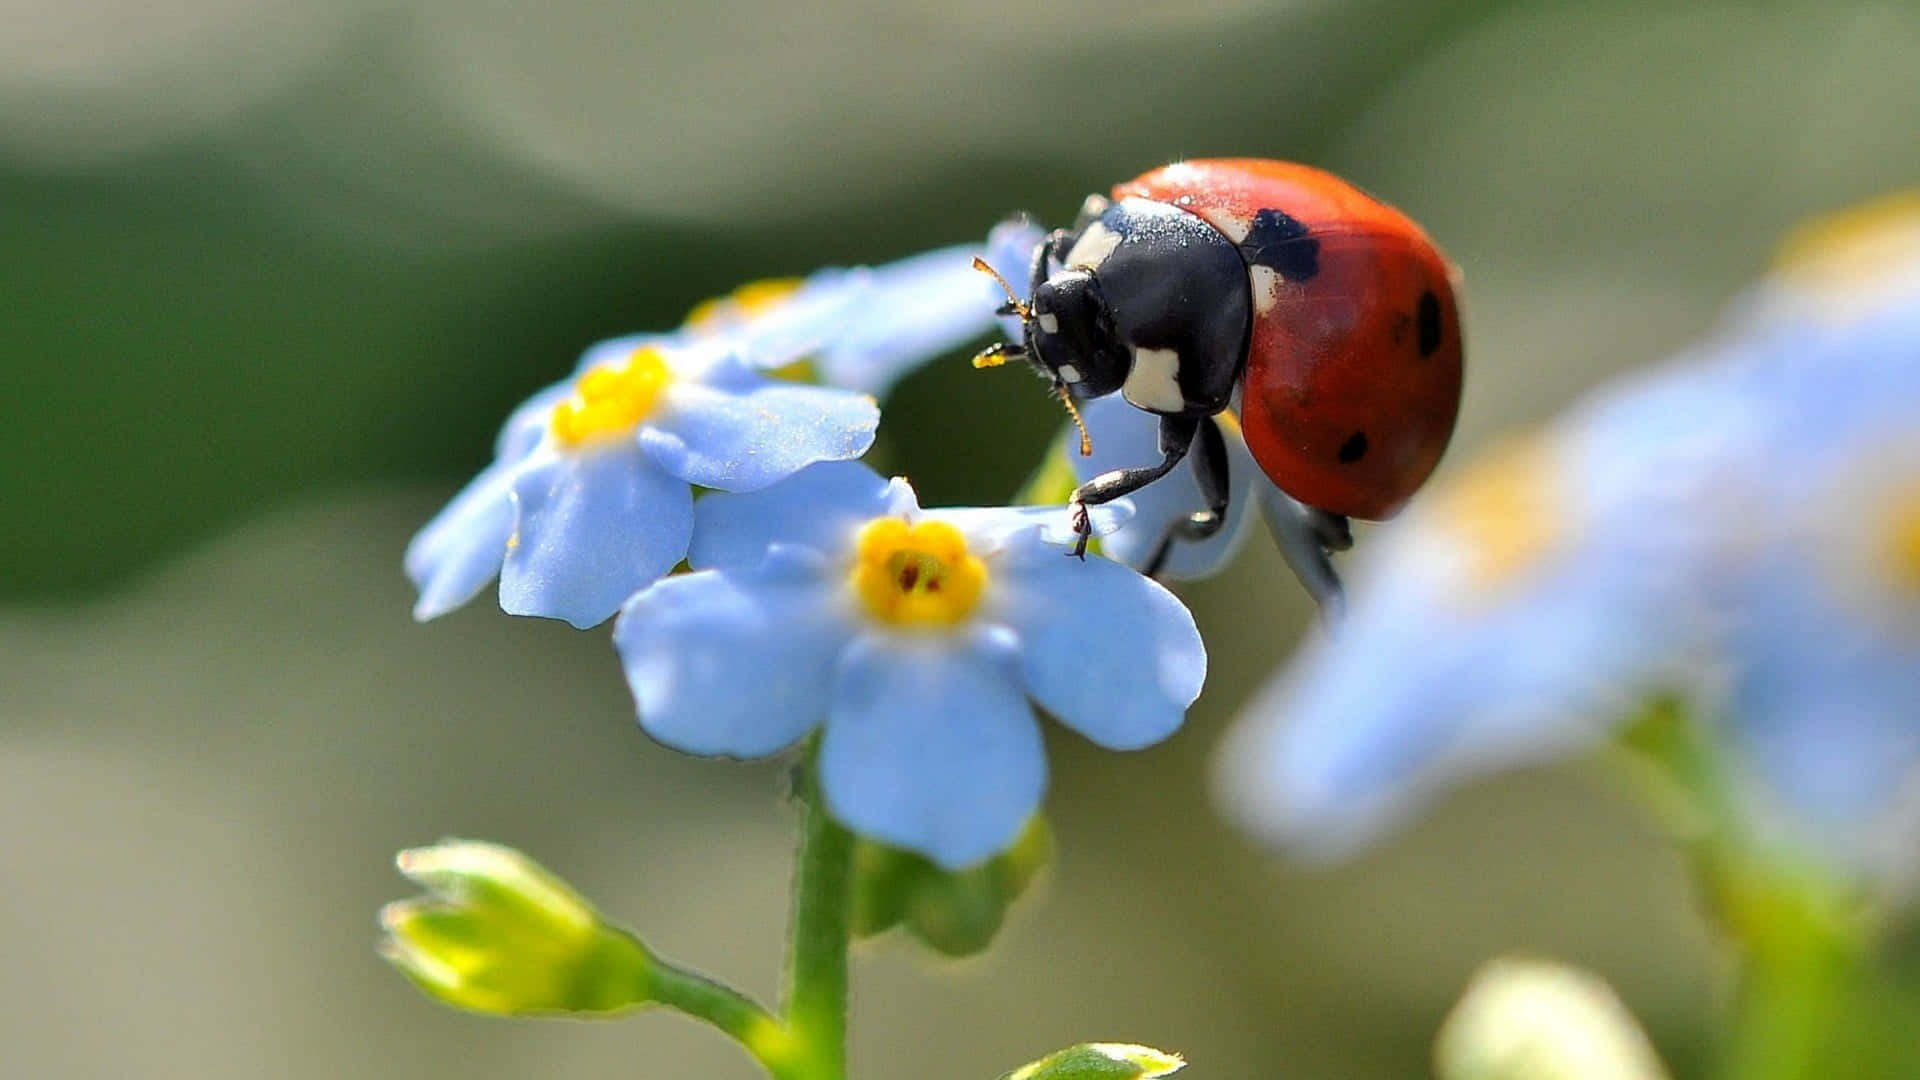 Cute Ladybug Pictures 1920 X 1080 Picture